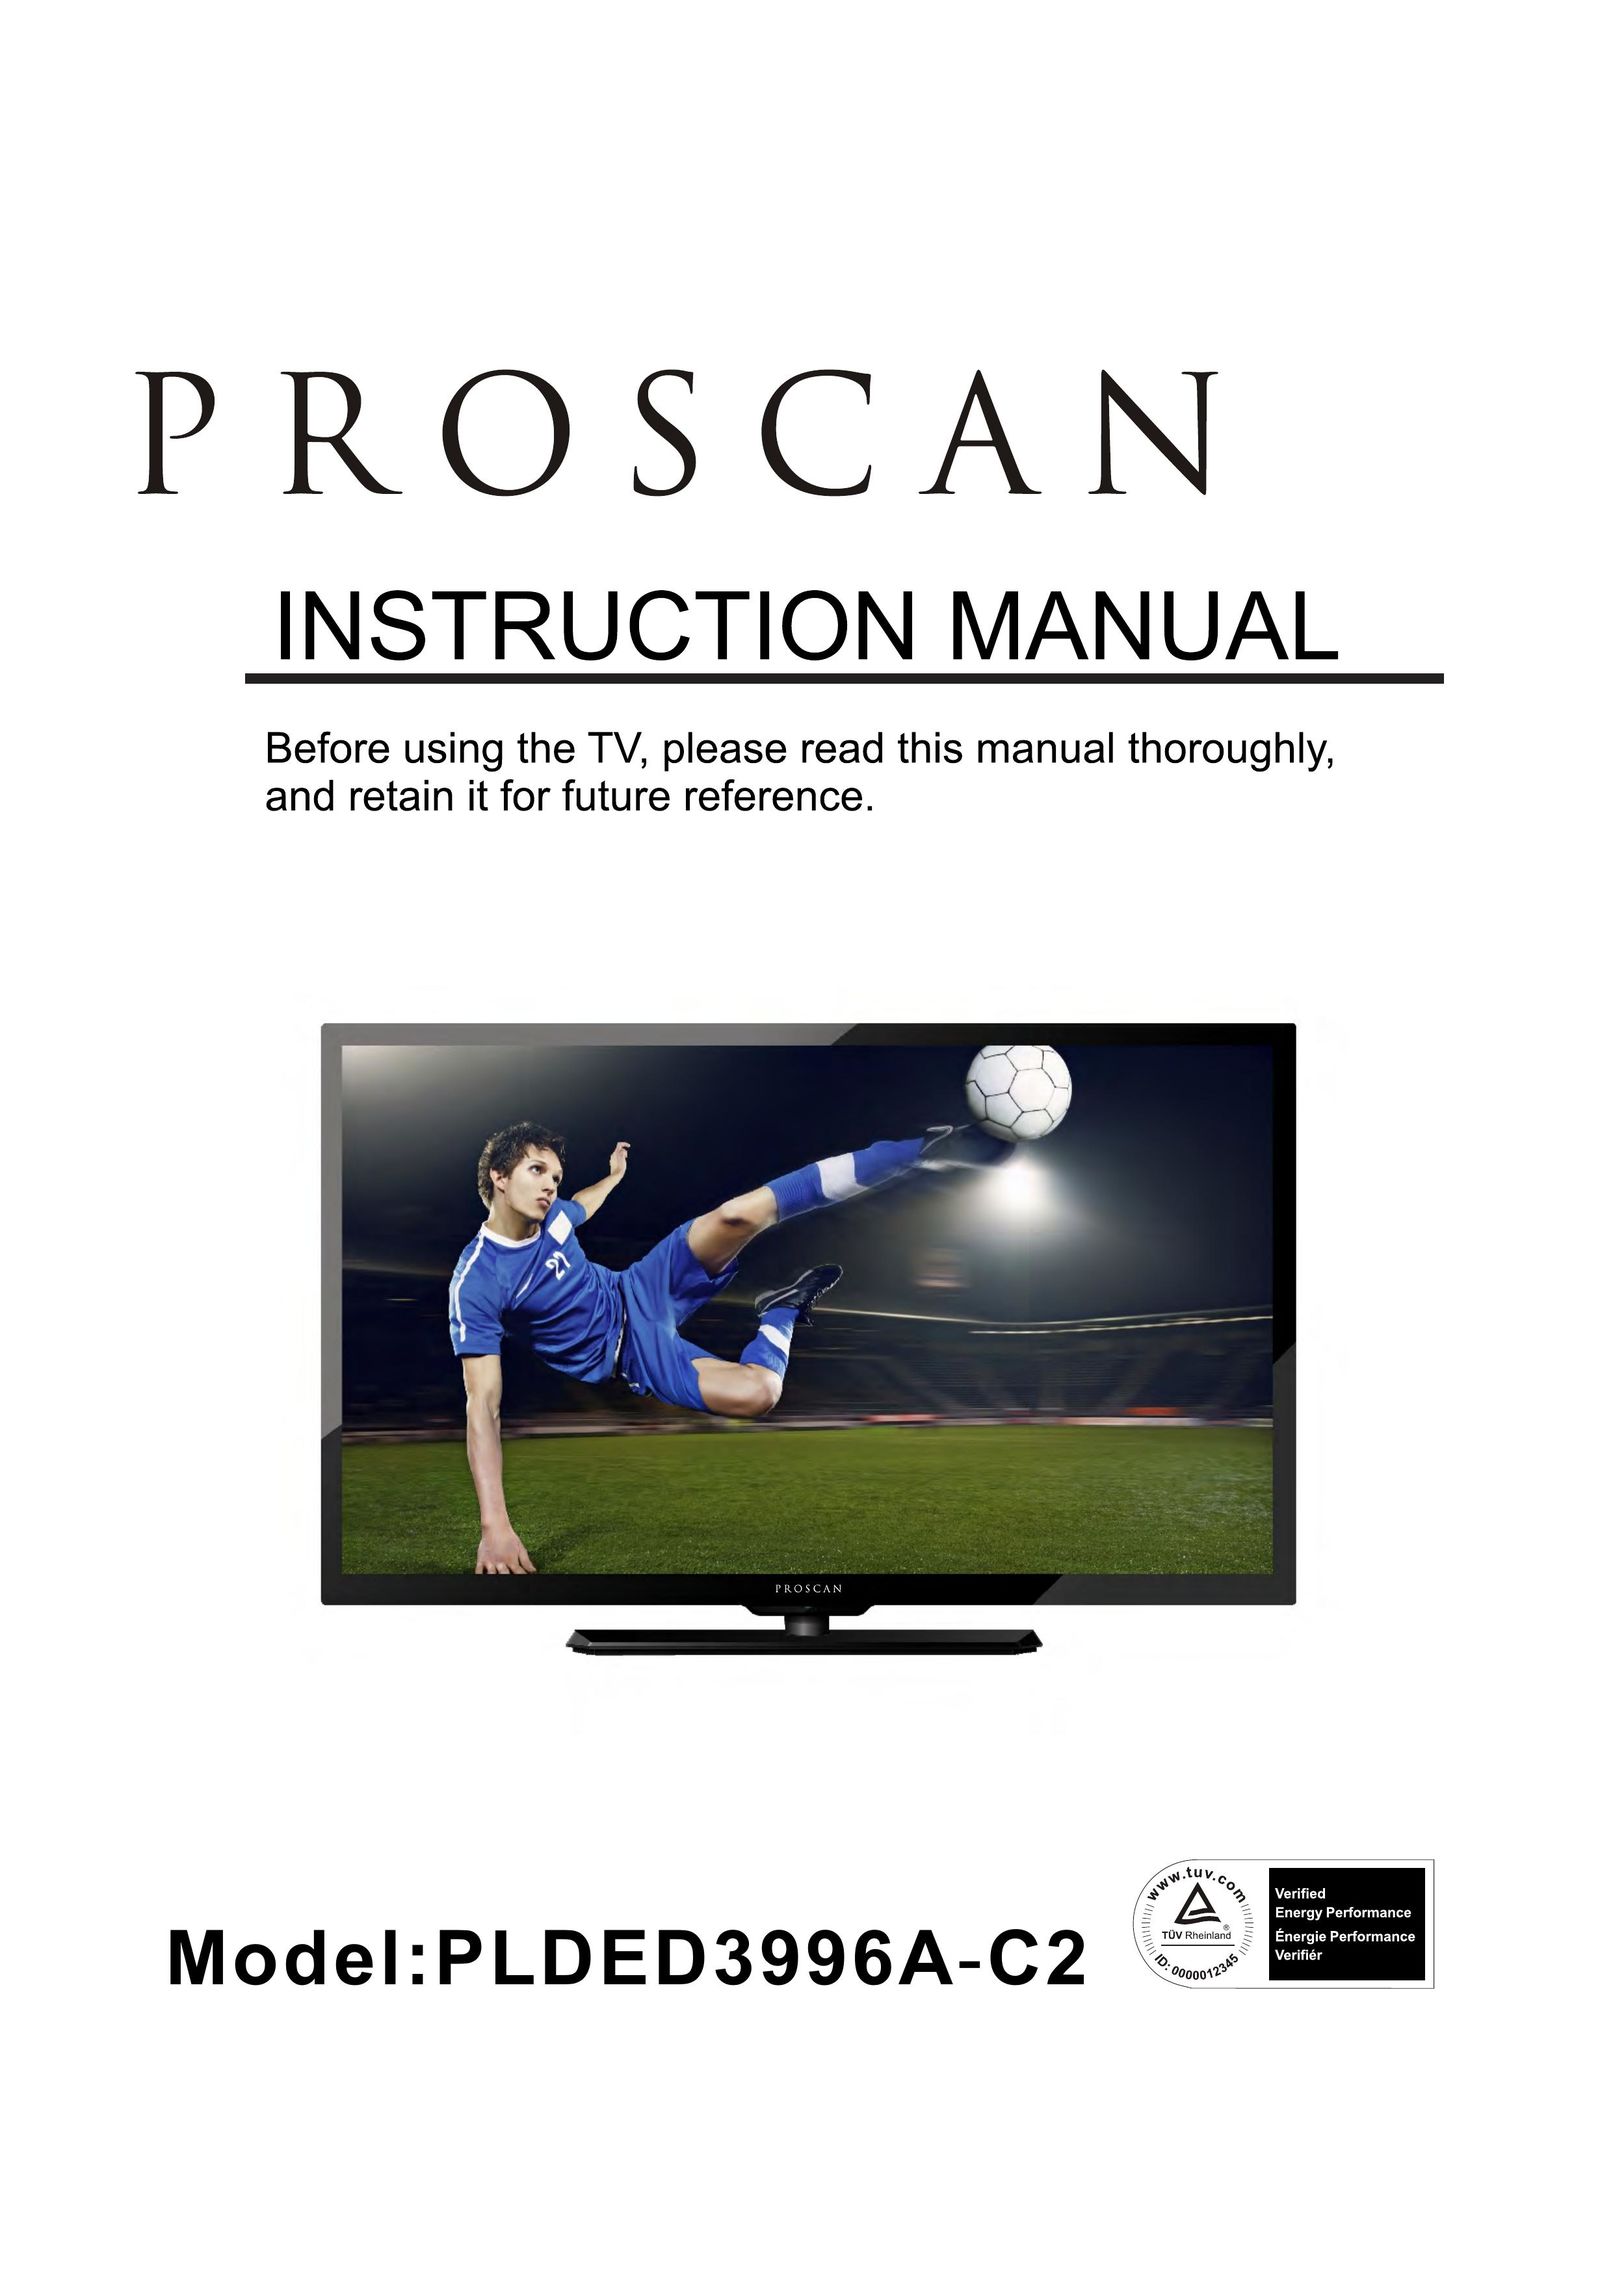 ProScan PLDED3996A-C2 CRT Television User Manual